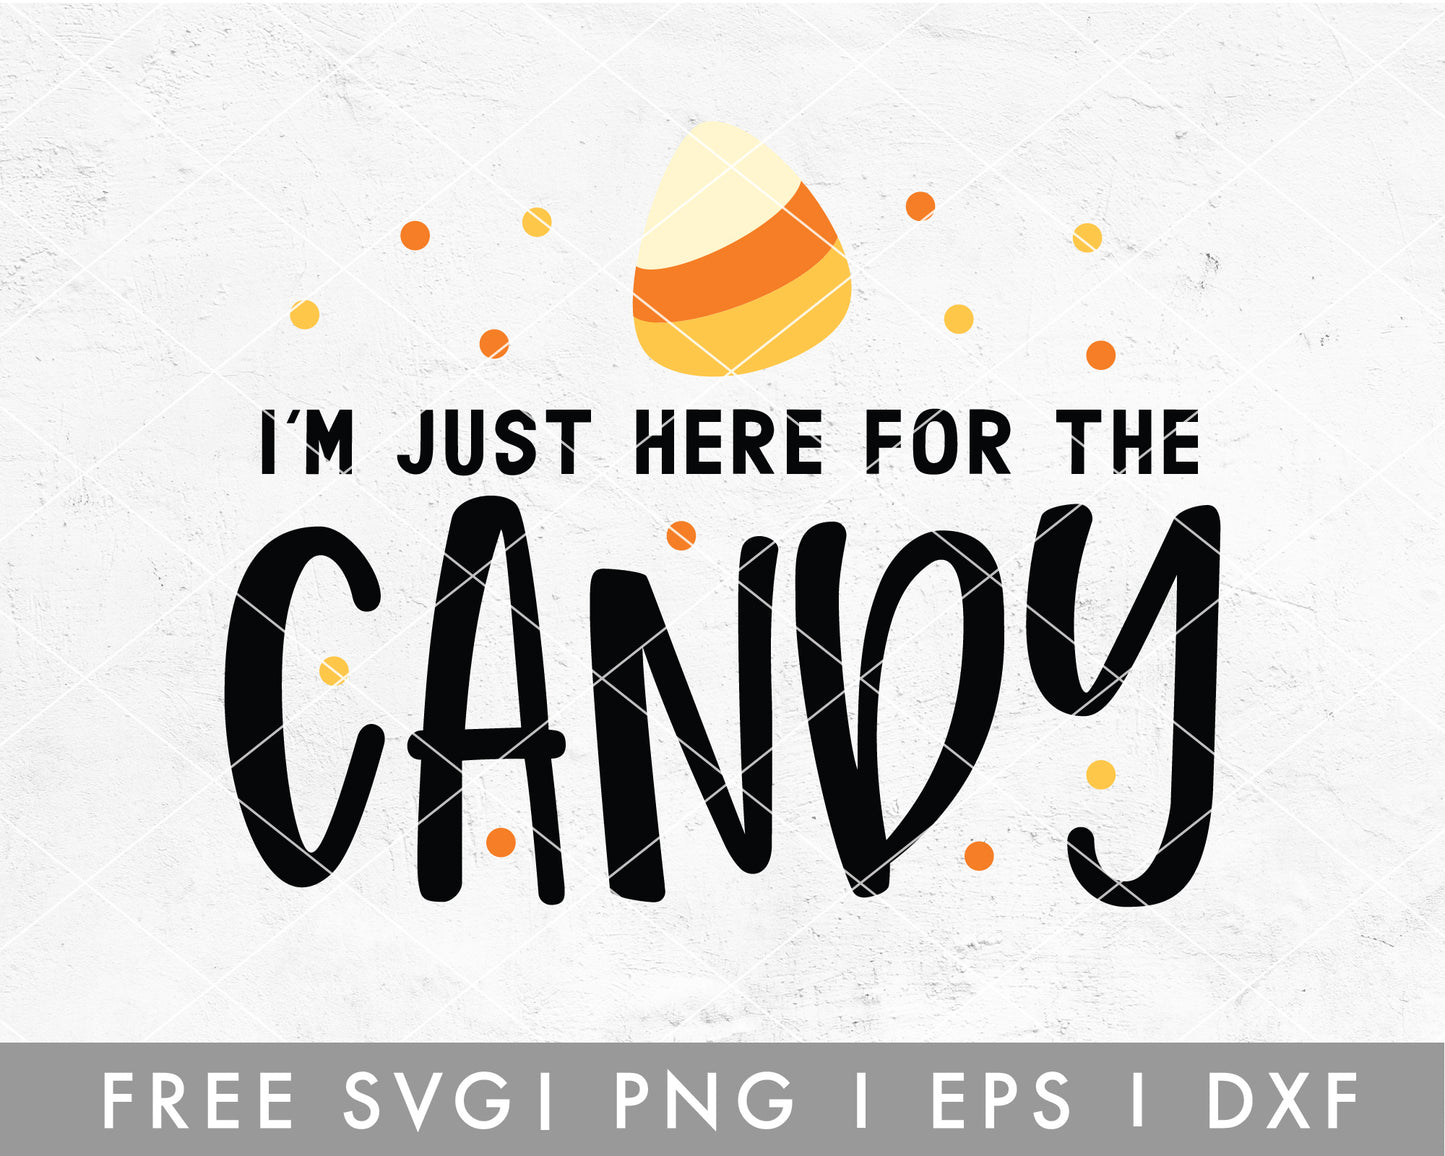 FREE I'm Just Here For The Candy SVG Cut File for Cricut, Cameo Silhouette | Halloween SVG Cut File for Kids